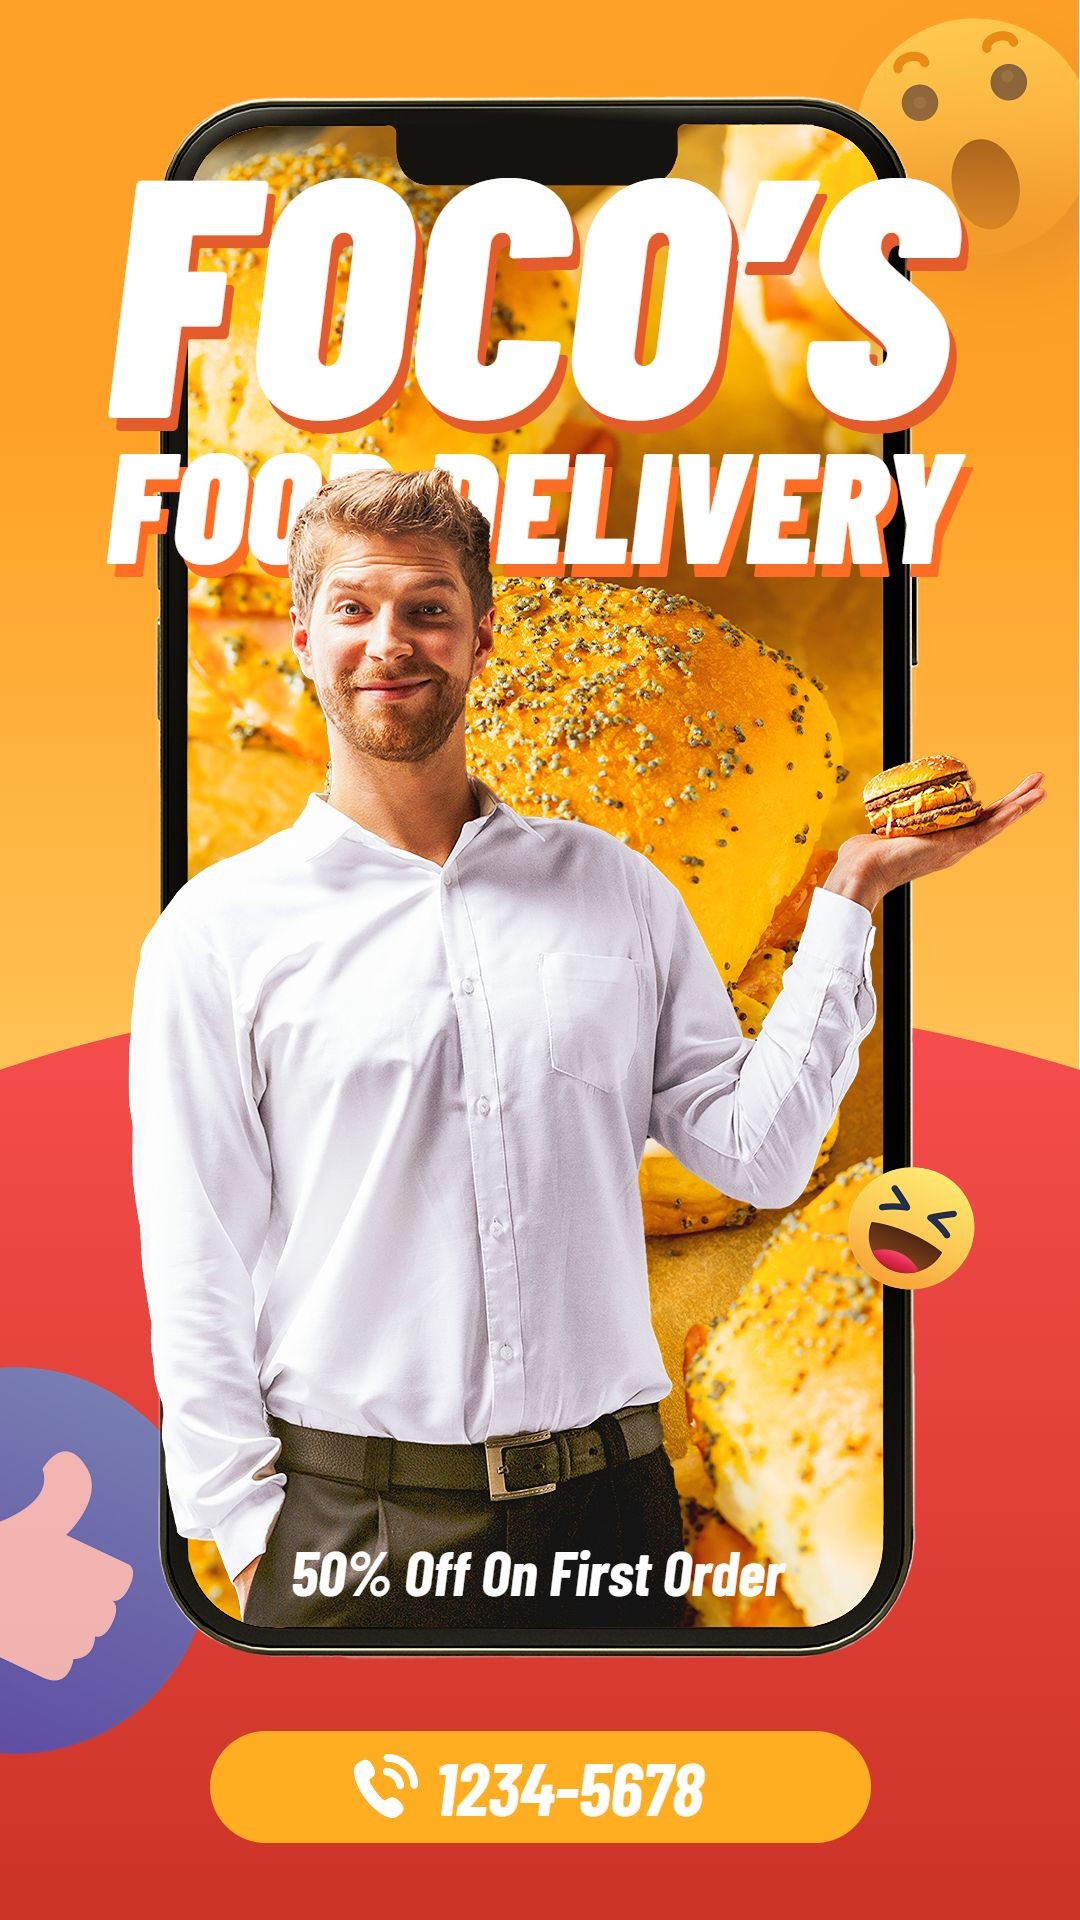 Hamburger Fast Food Delivery Discount Promo Smart Phone Interface Simulation Creative Campaign Marketing Ecommerce Story预览效果